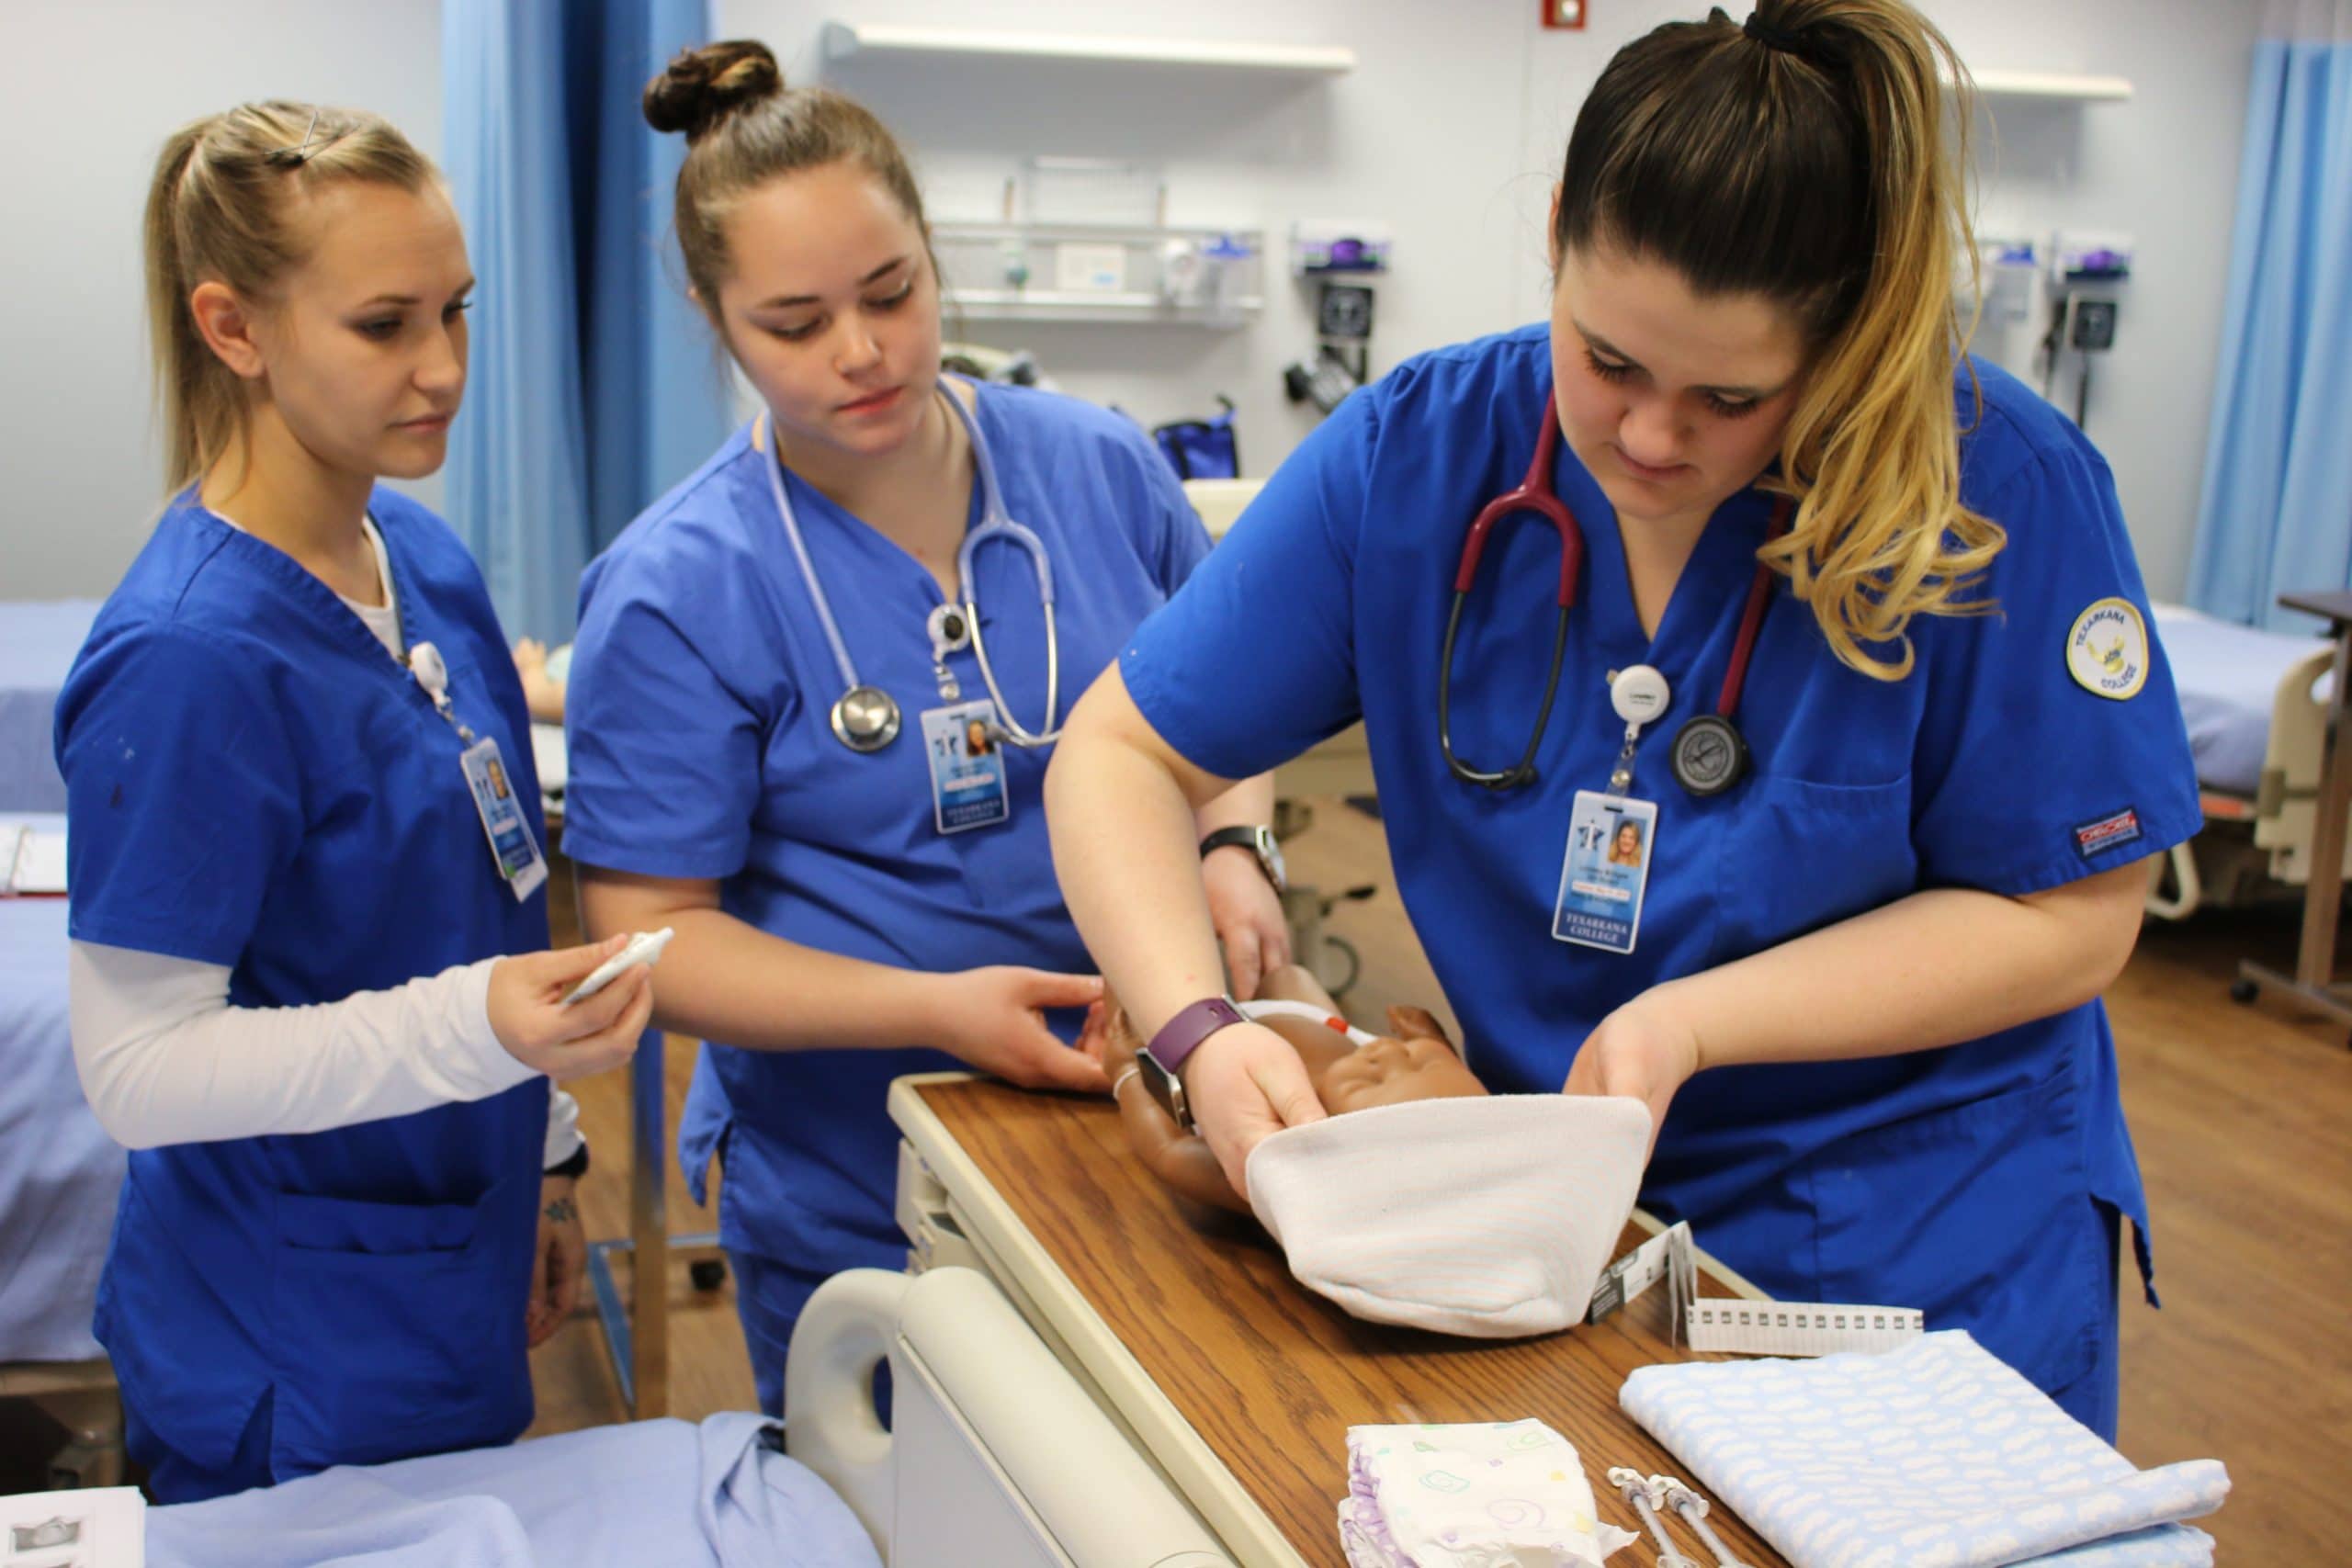 Texarkana College students learning nursing techniques in our LVN program.